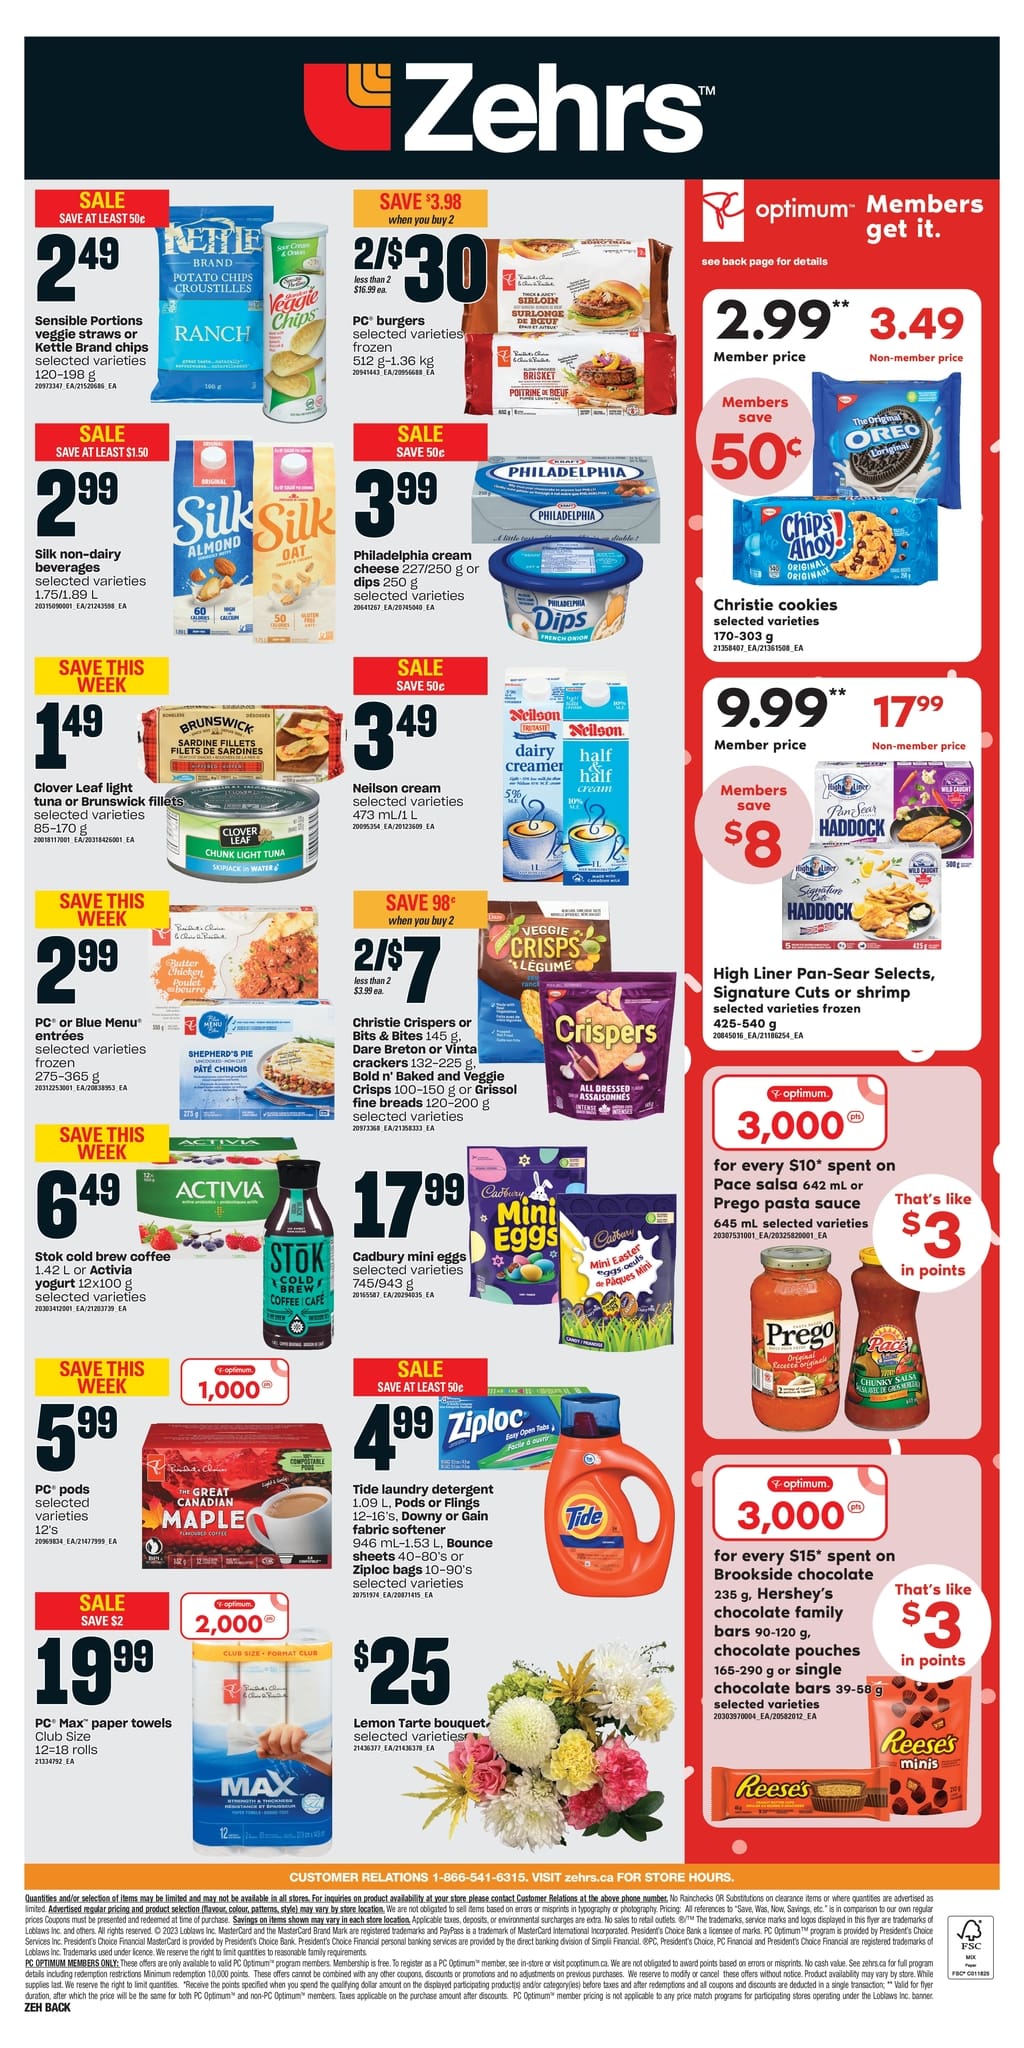 Zehrs - Weekly Flyer Specials - Page 3